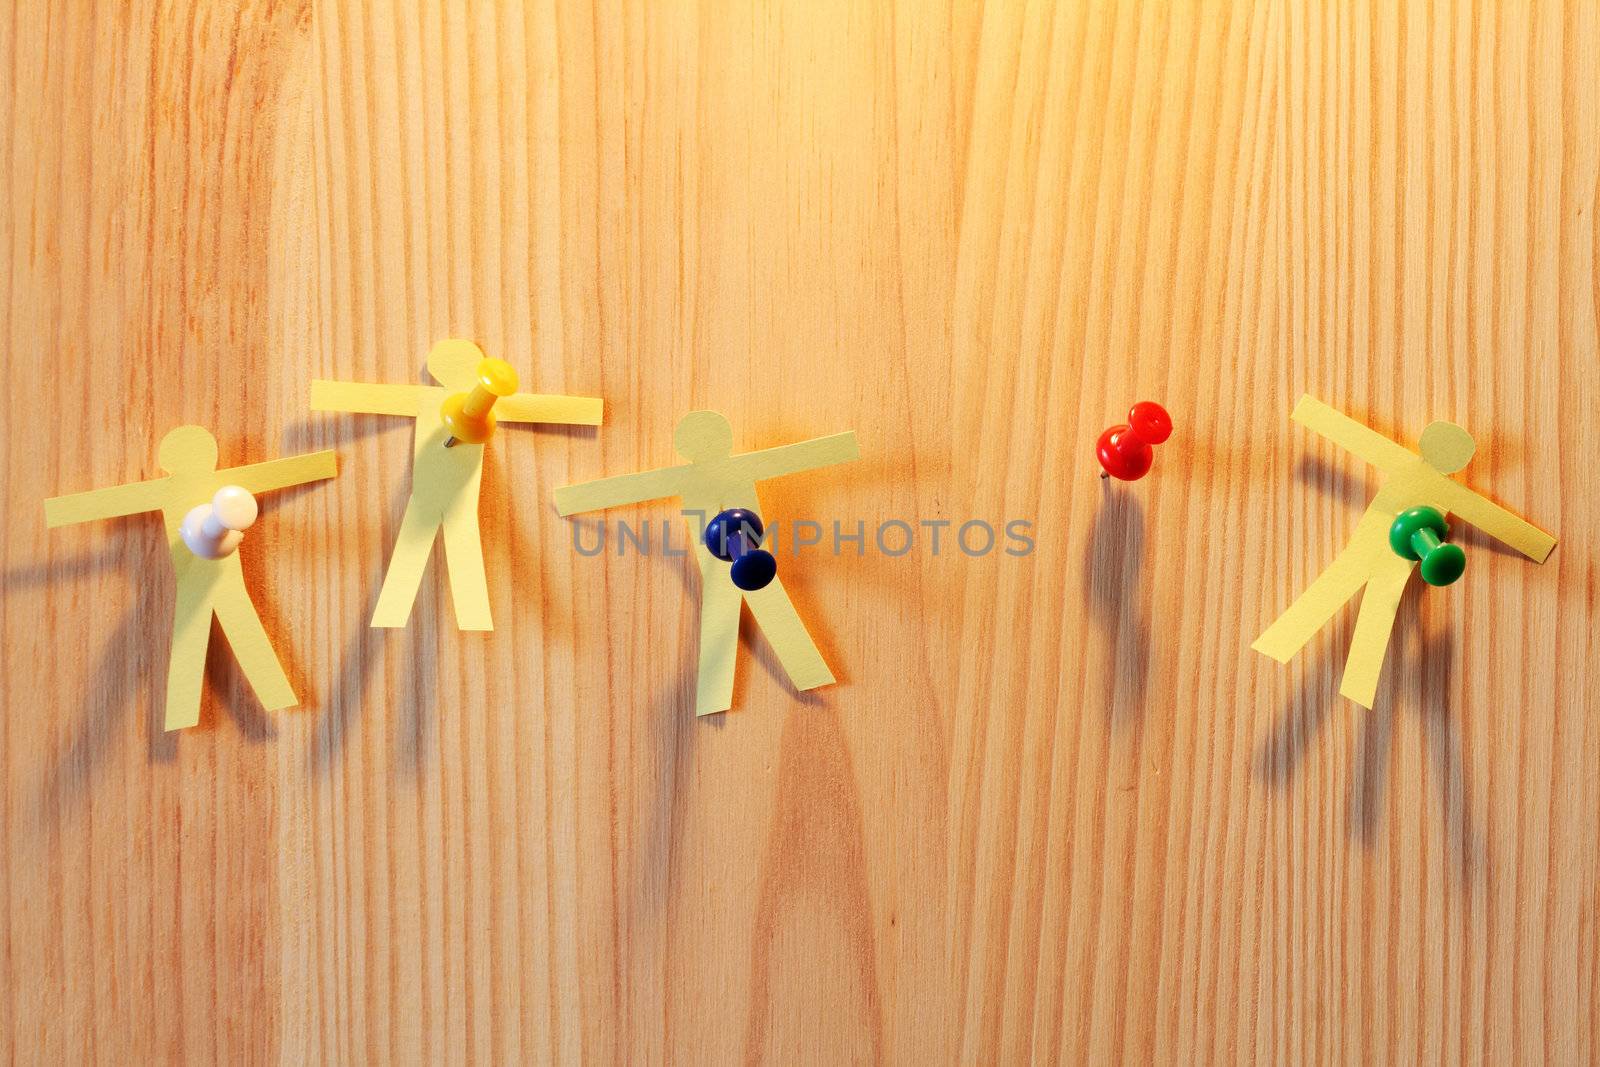 Four paper men hanging with thumbtacks on wooden background. One thumbtack is free